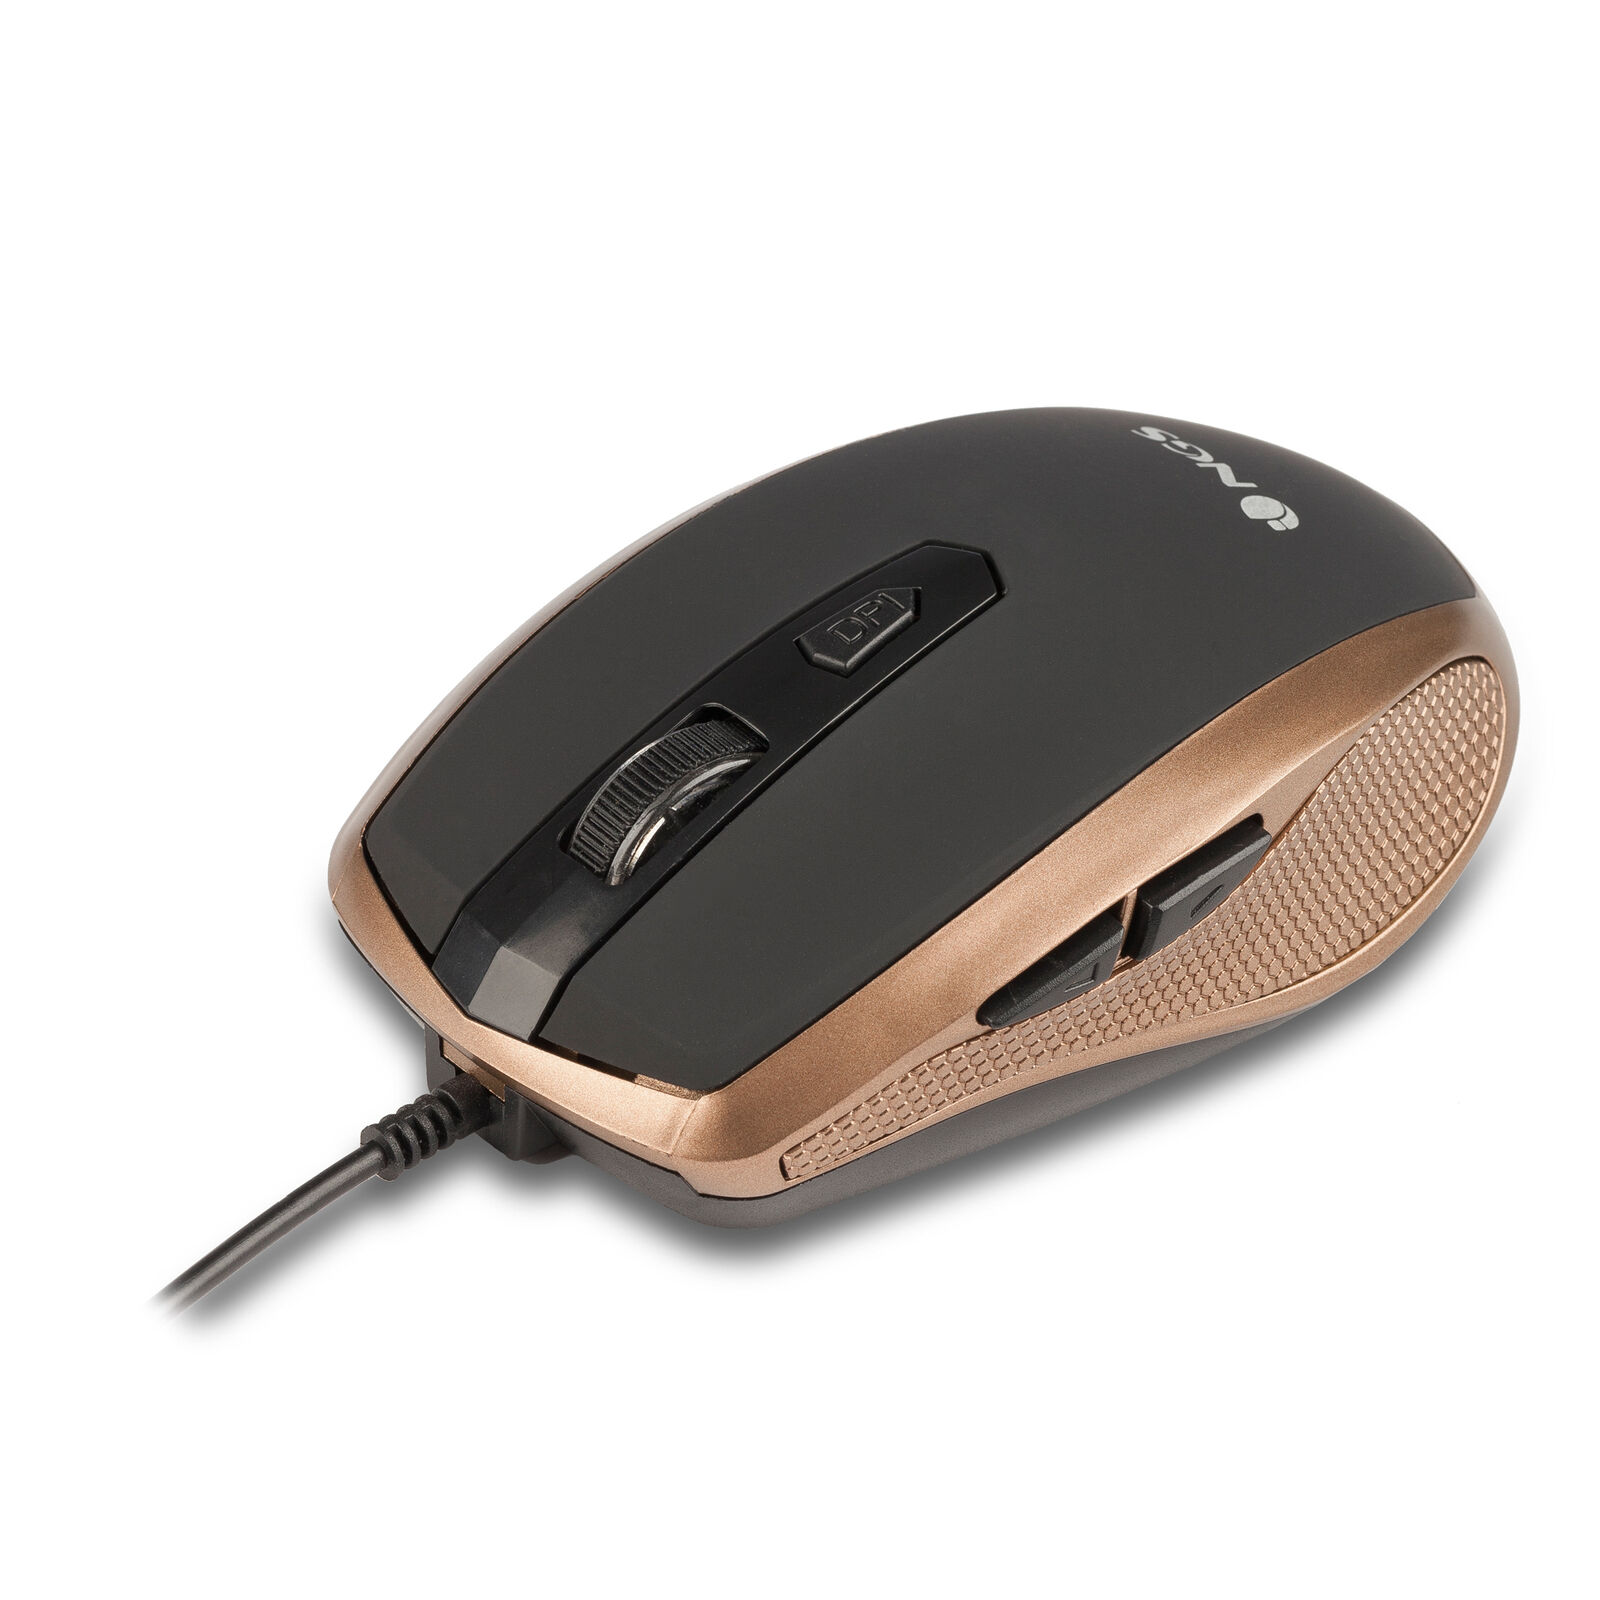 NGS Tick Wired Optical Gaming Mouse, 5 Buttons + Scroll Wheel - Gold